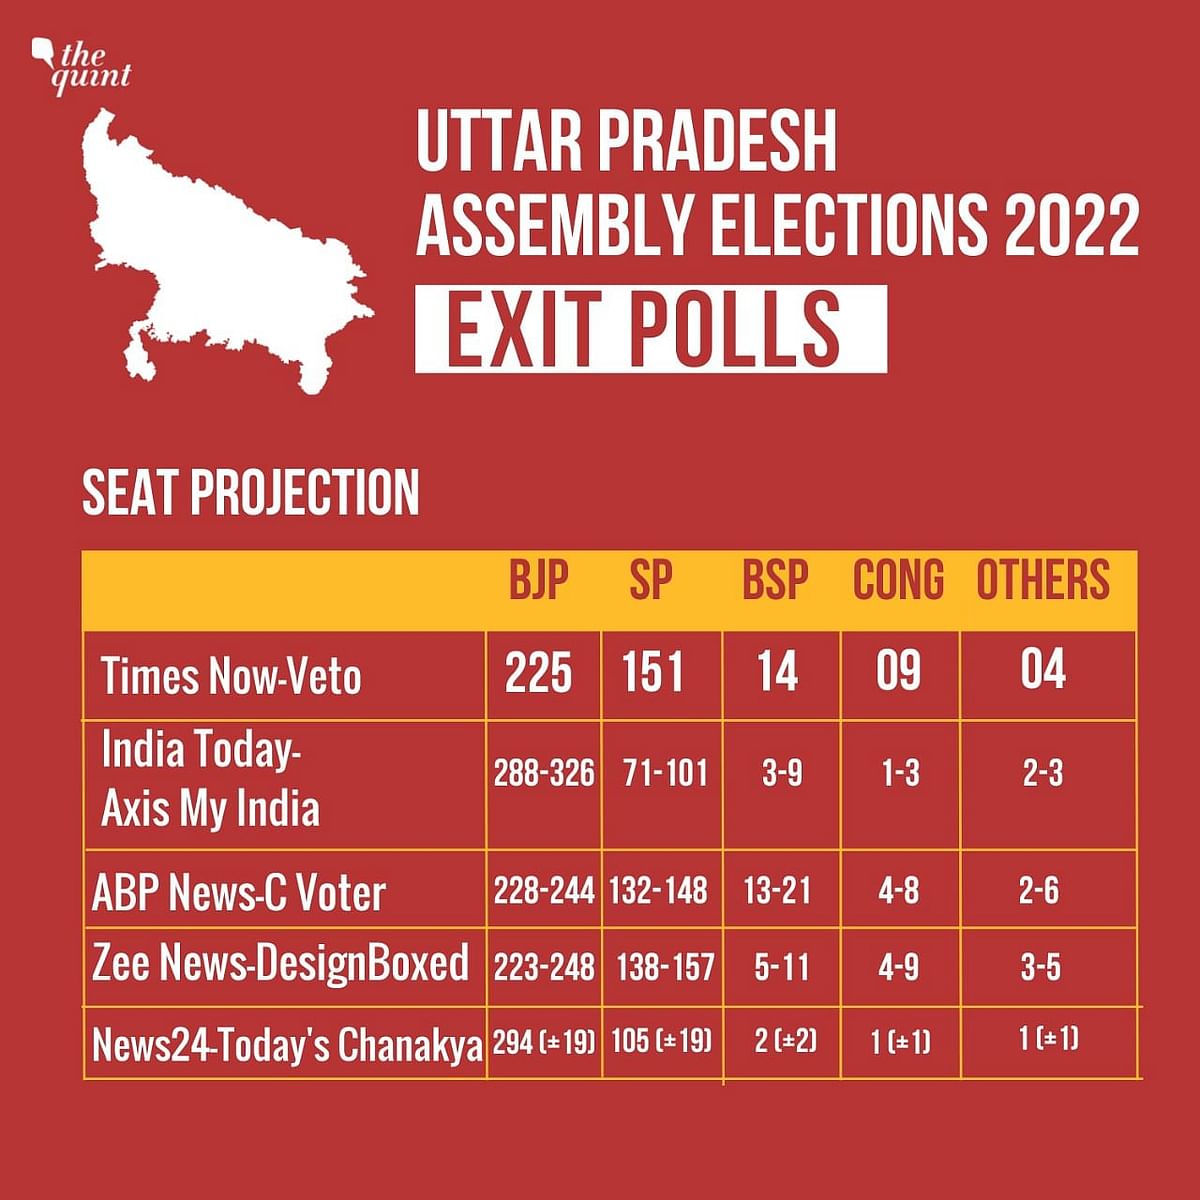 How accurate were the exit polls in predicting the outcomes for Punjab, UP, Goa, and others in last election?